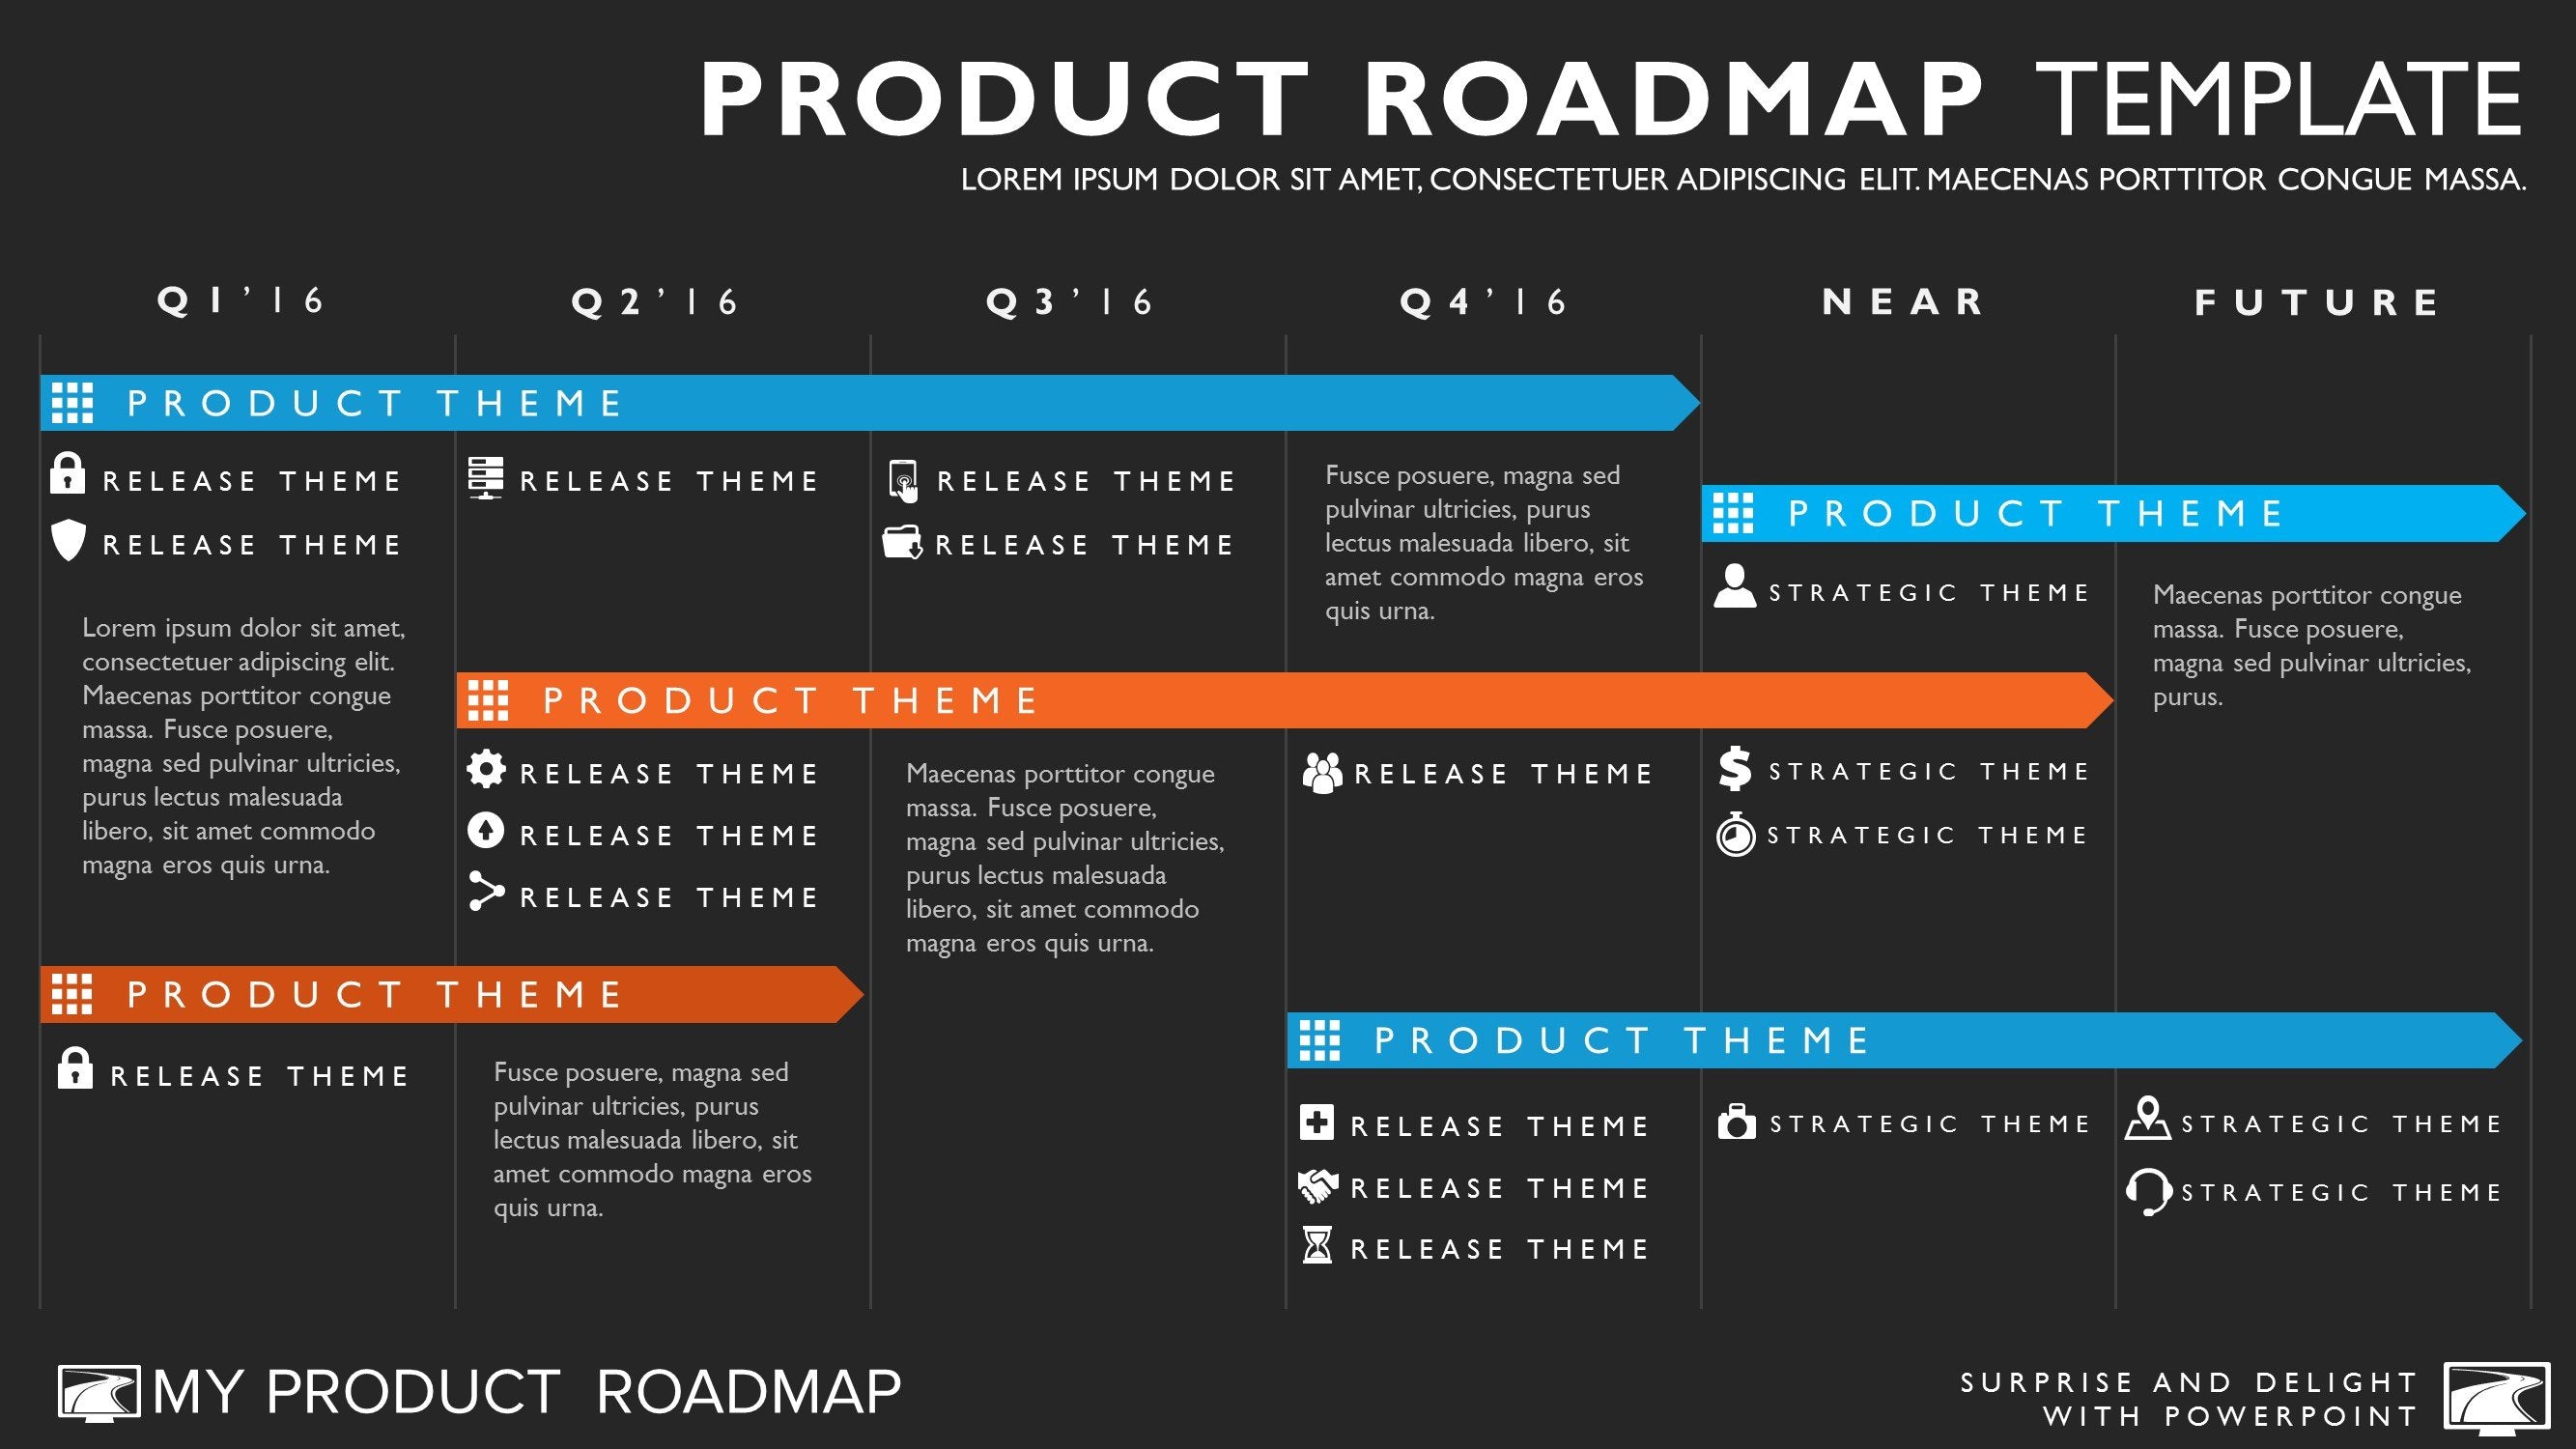 product roadmap template ppt free download